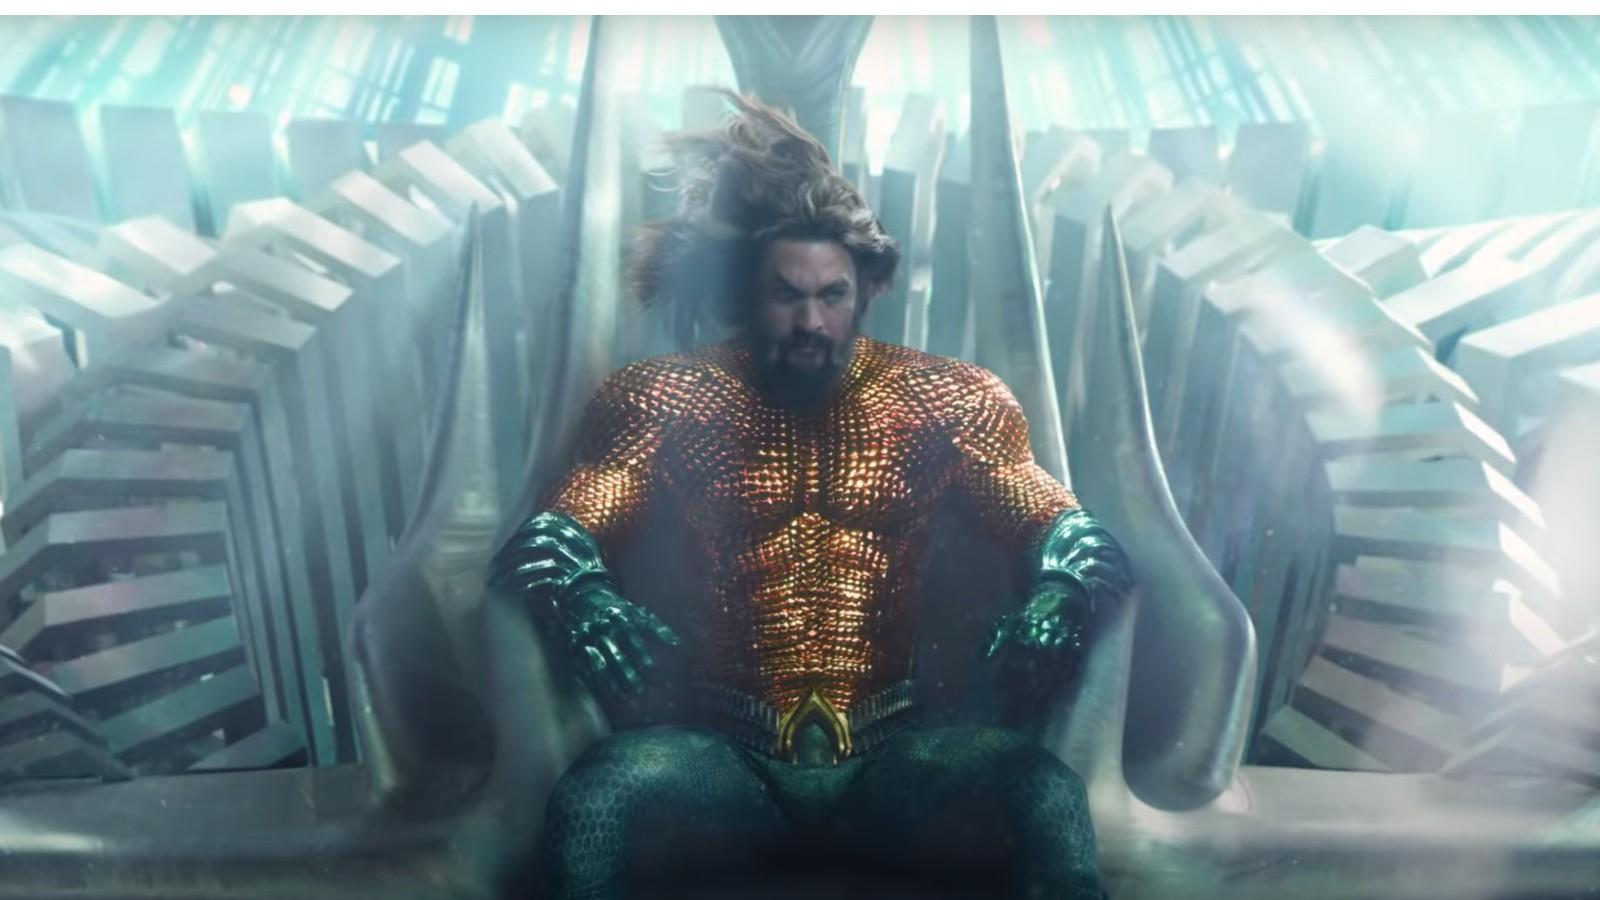 Jason Momoa underwater as Arthur Curry in the Aquaman franchise.